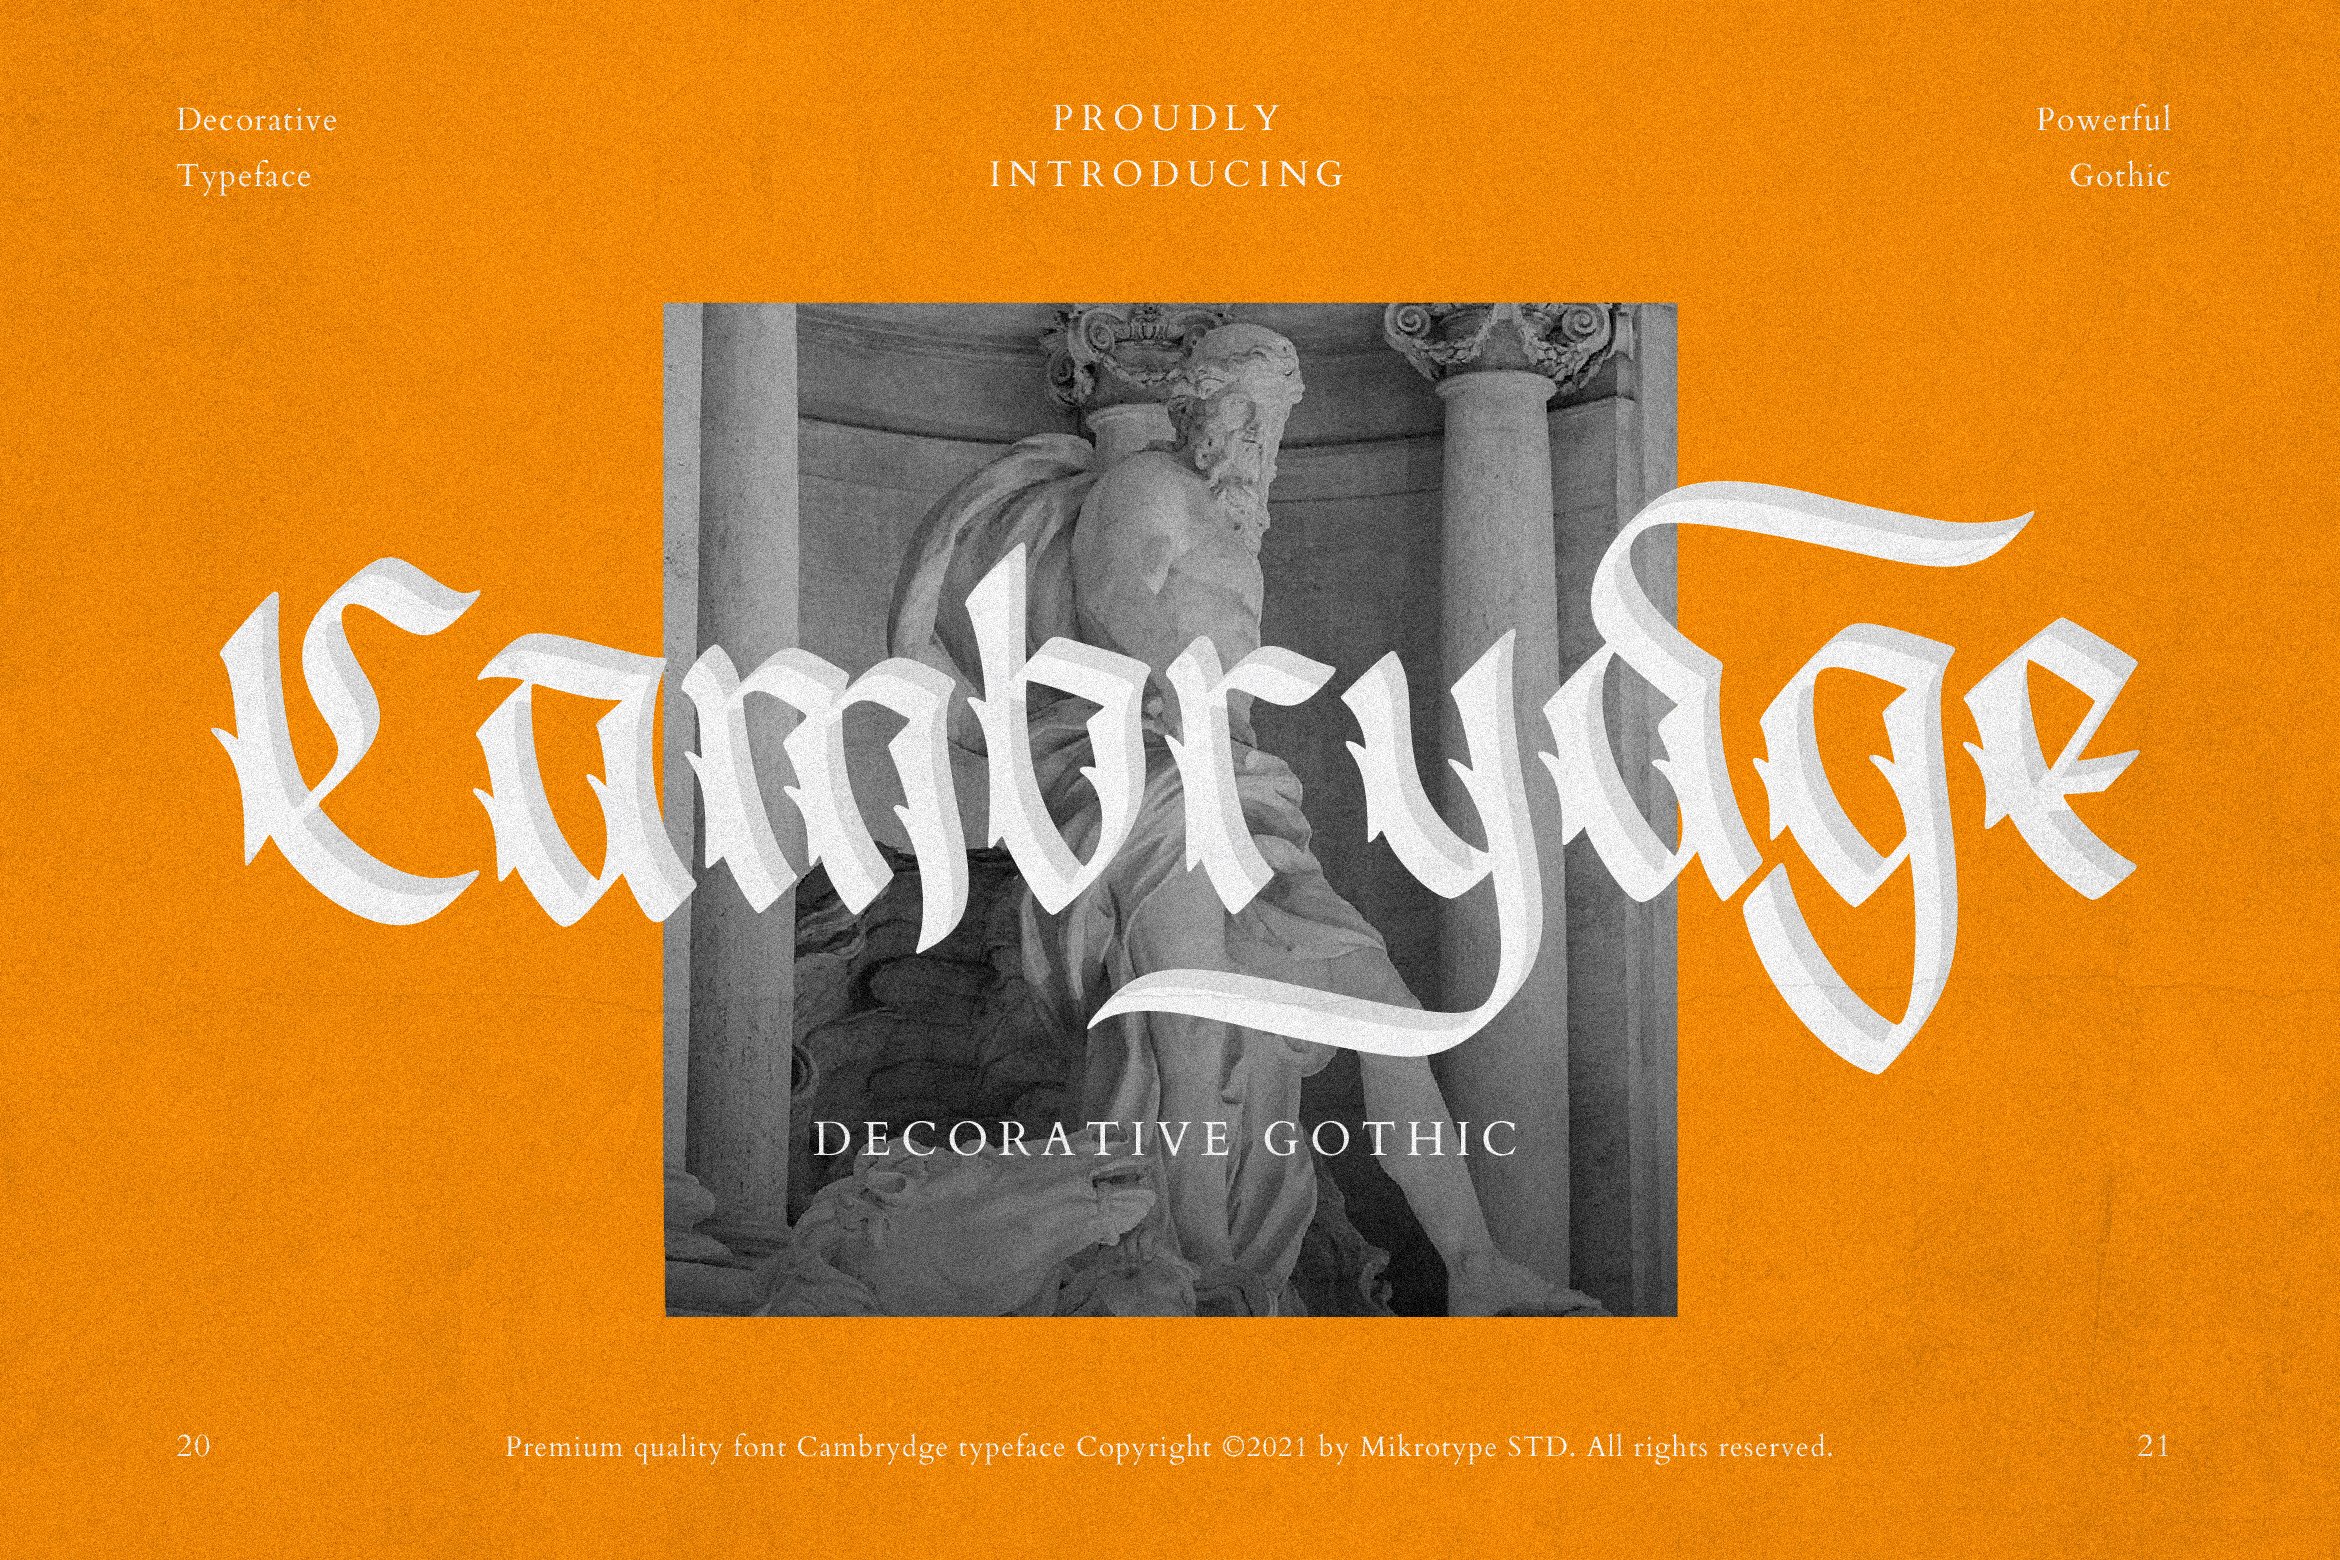 Cambrydge Gothic Advertisement Font cover image.